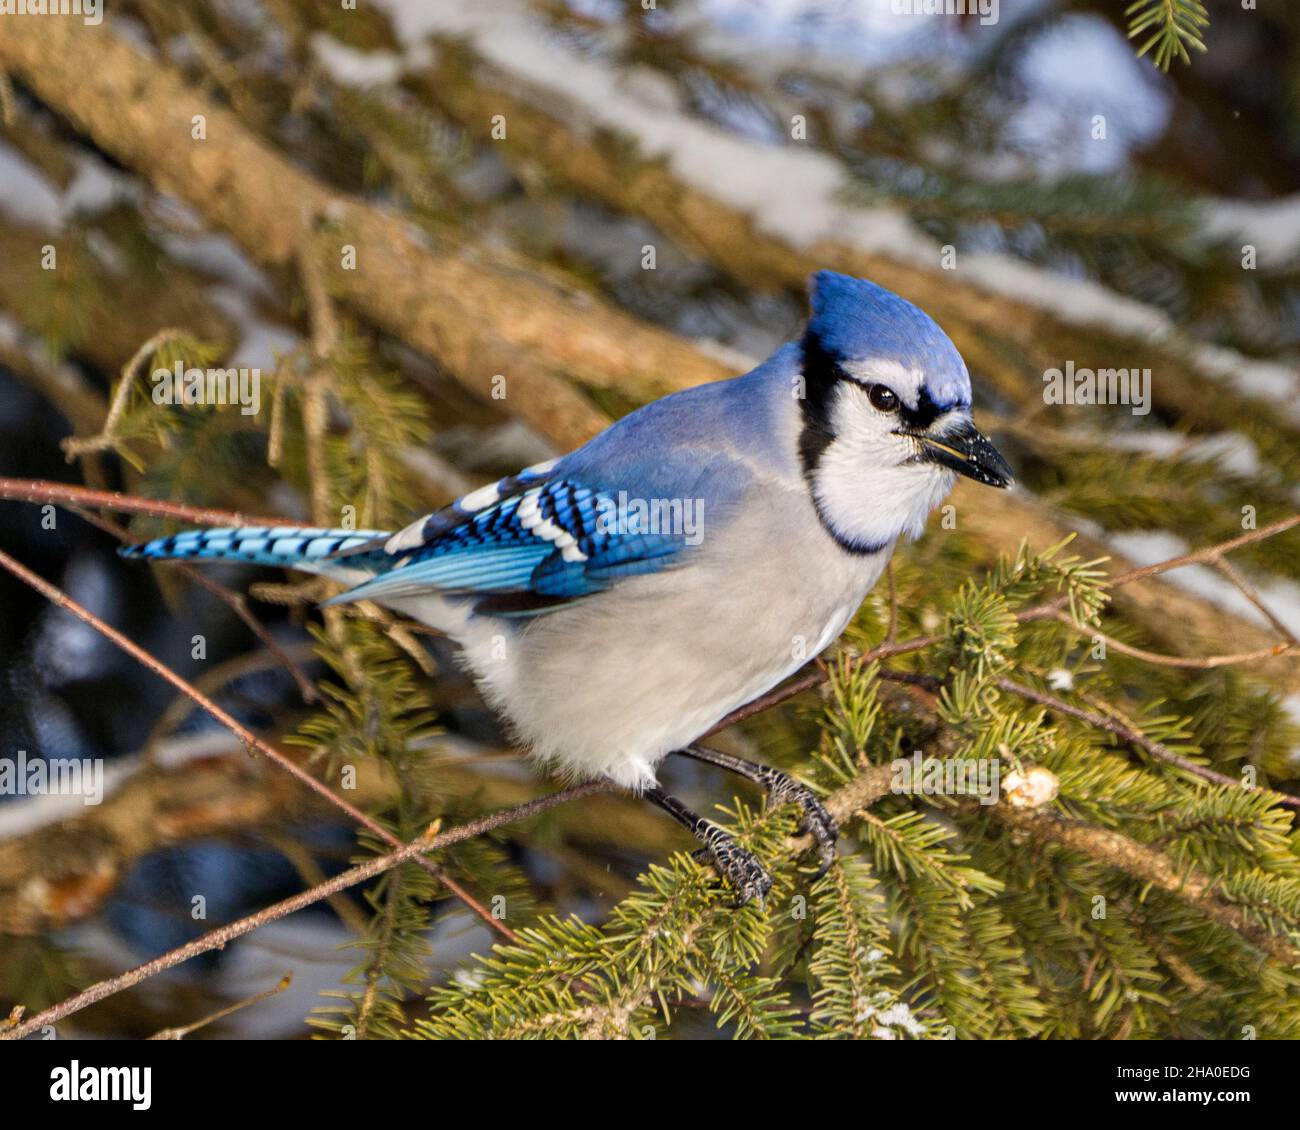 Blue Jay bird close-up view perched on fir branches in the winter season with blur snow and branches background in its environment and habitat. Stock Photo